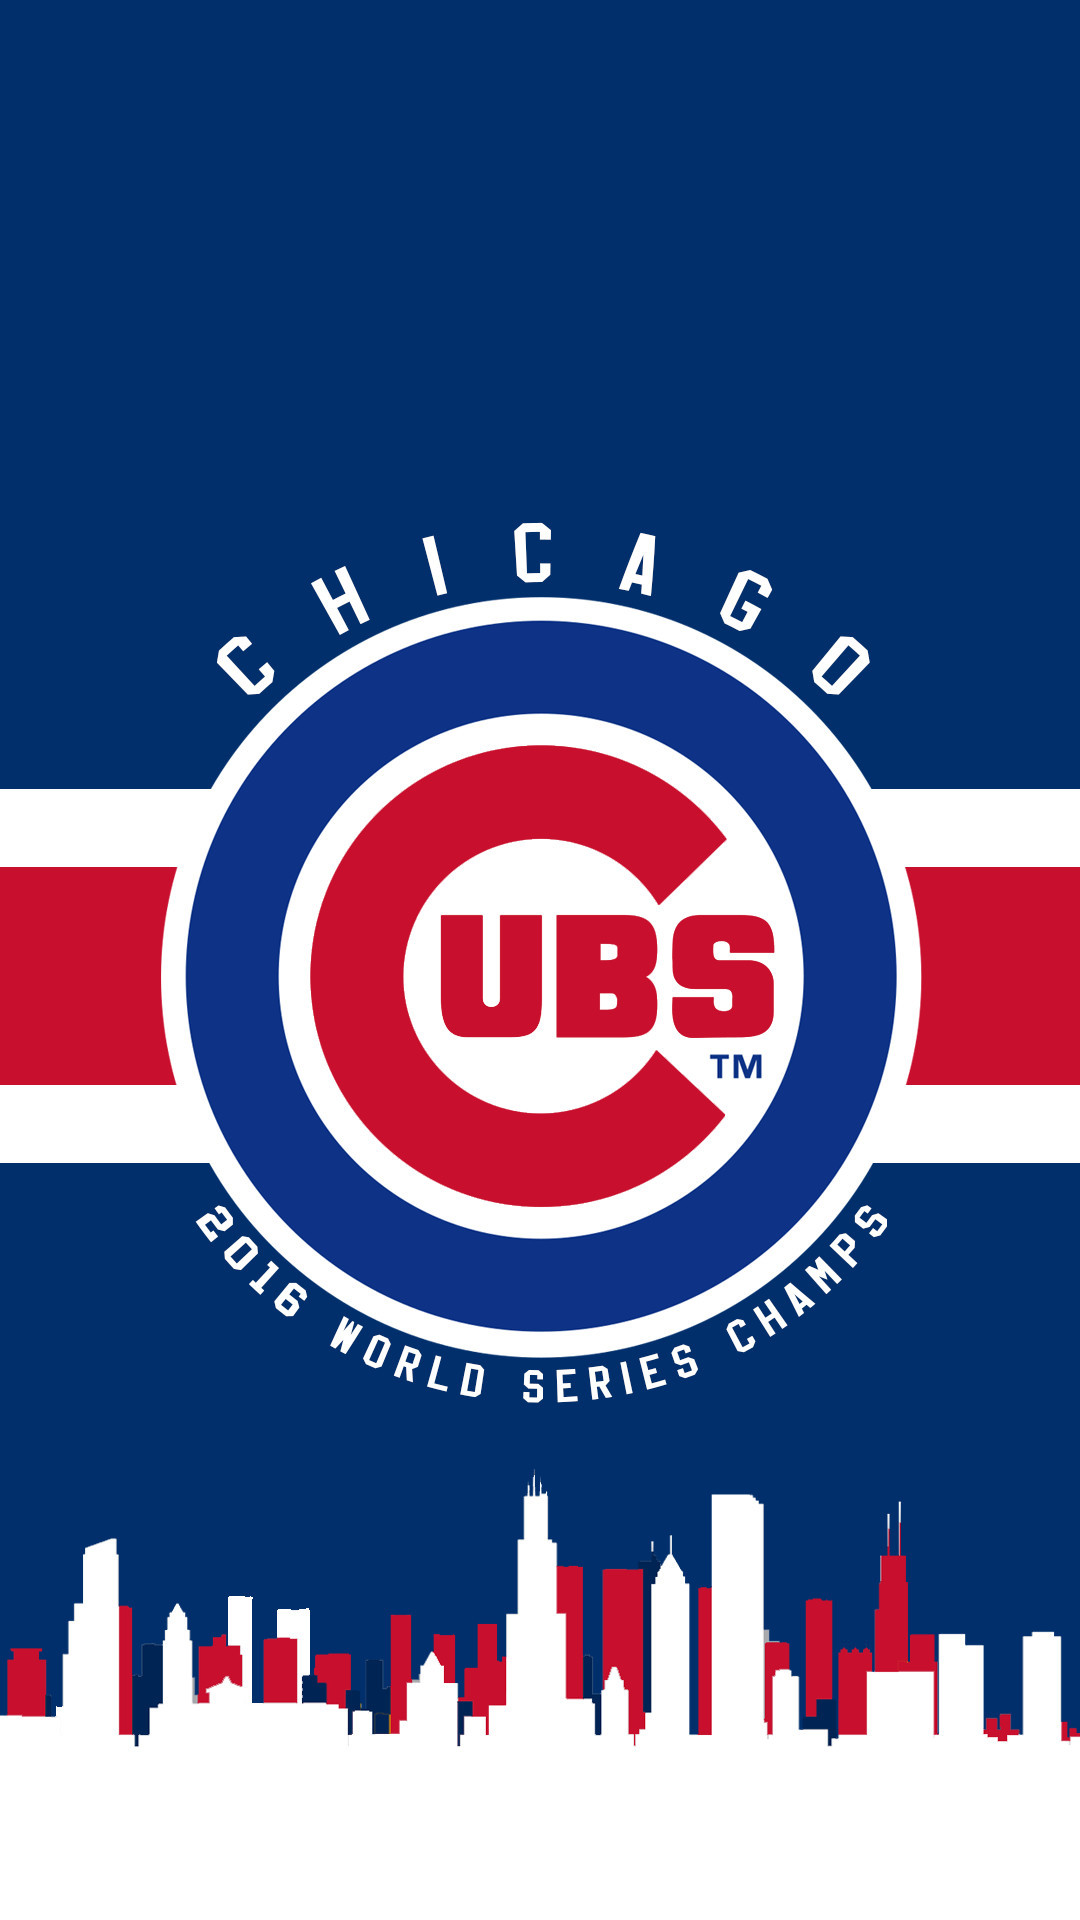 Chicago Cubs on Twitter New threads new wallpapers   WallpaperWednesday BenjaminMoore httpstcoON723PUP6r  Twitter